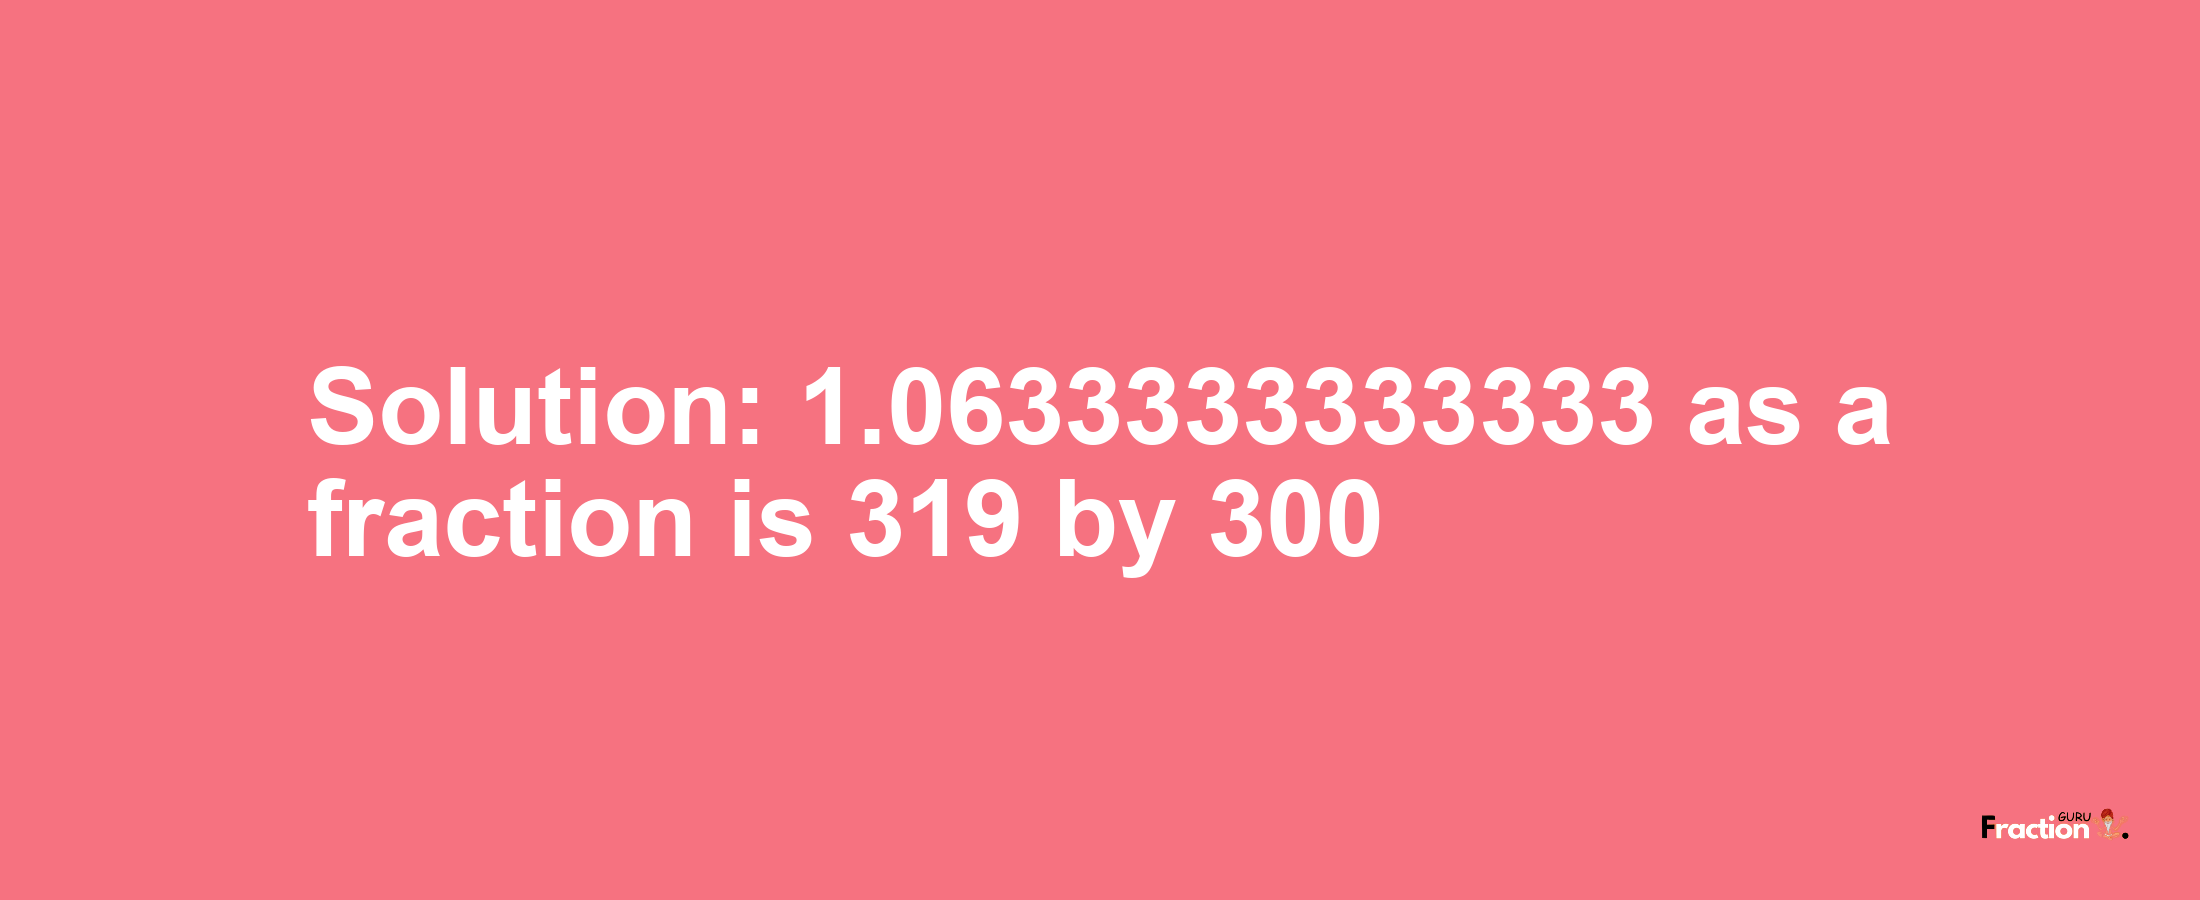 Solution:1.0633333333333 as a fraction is 319/300